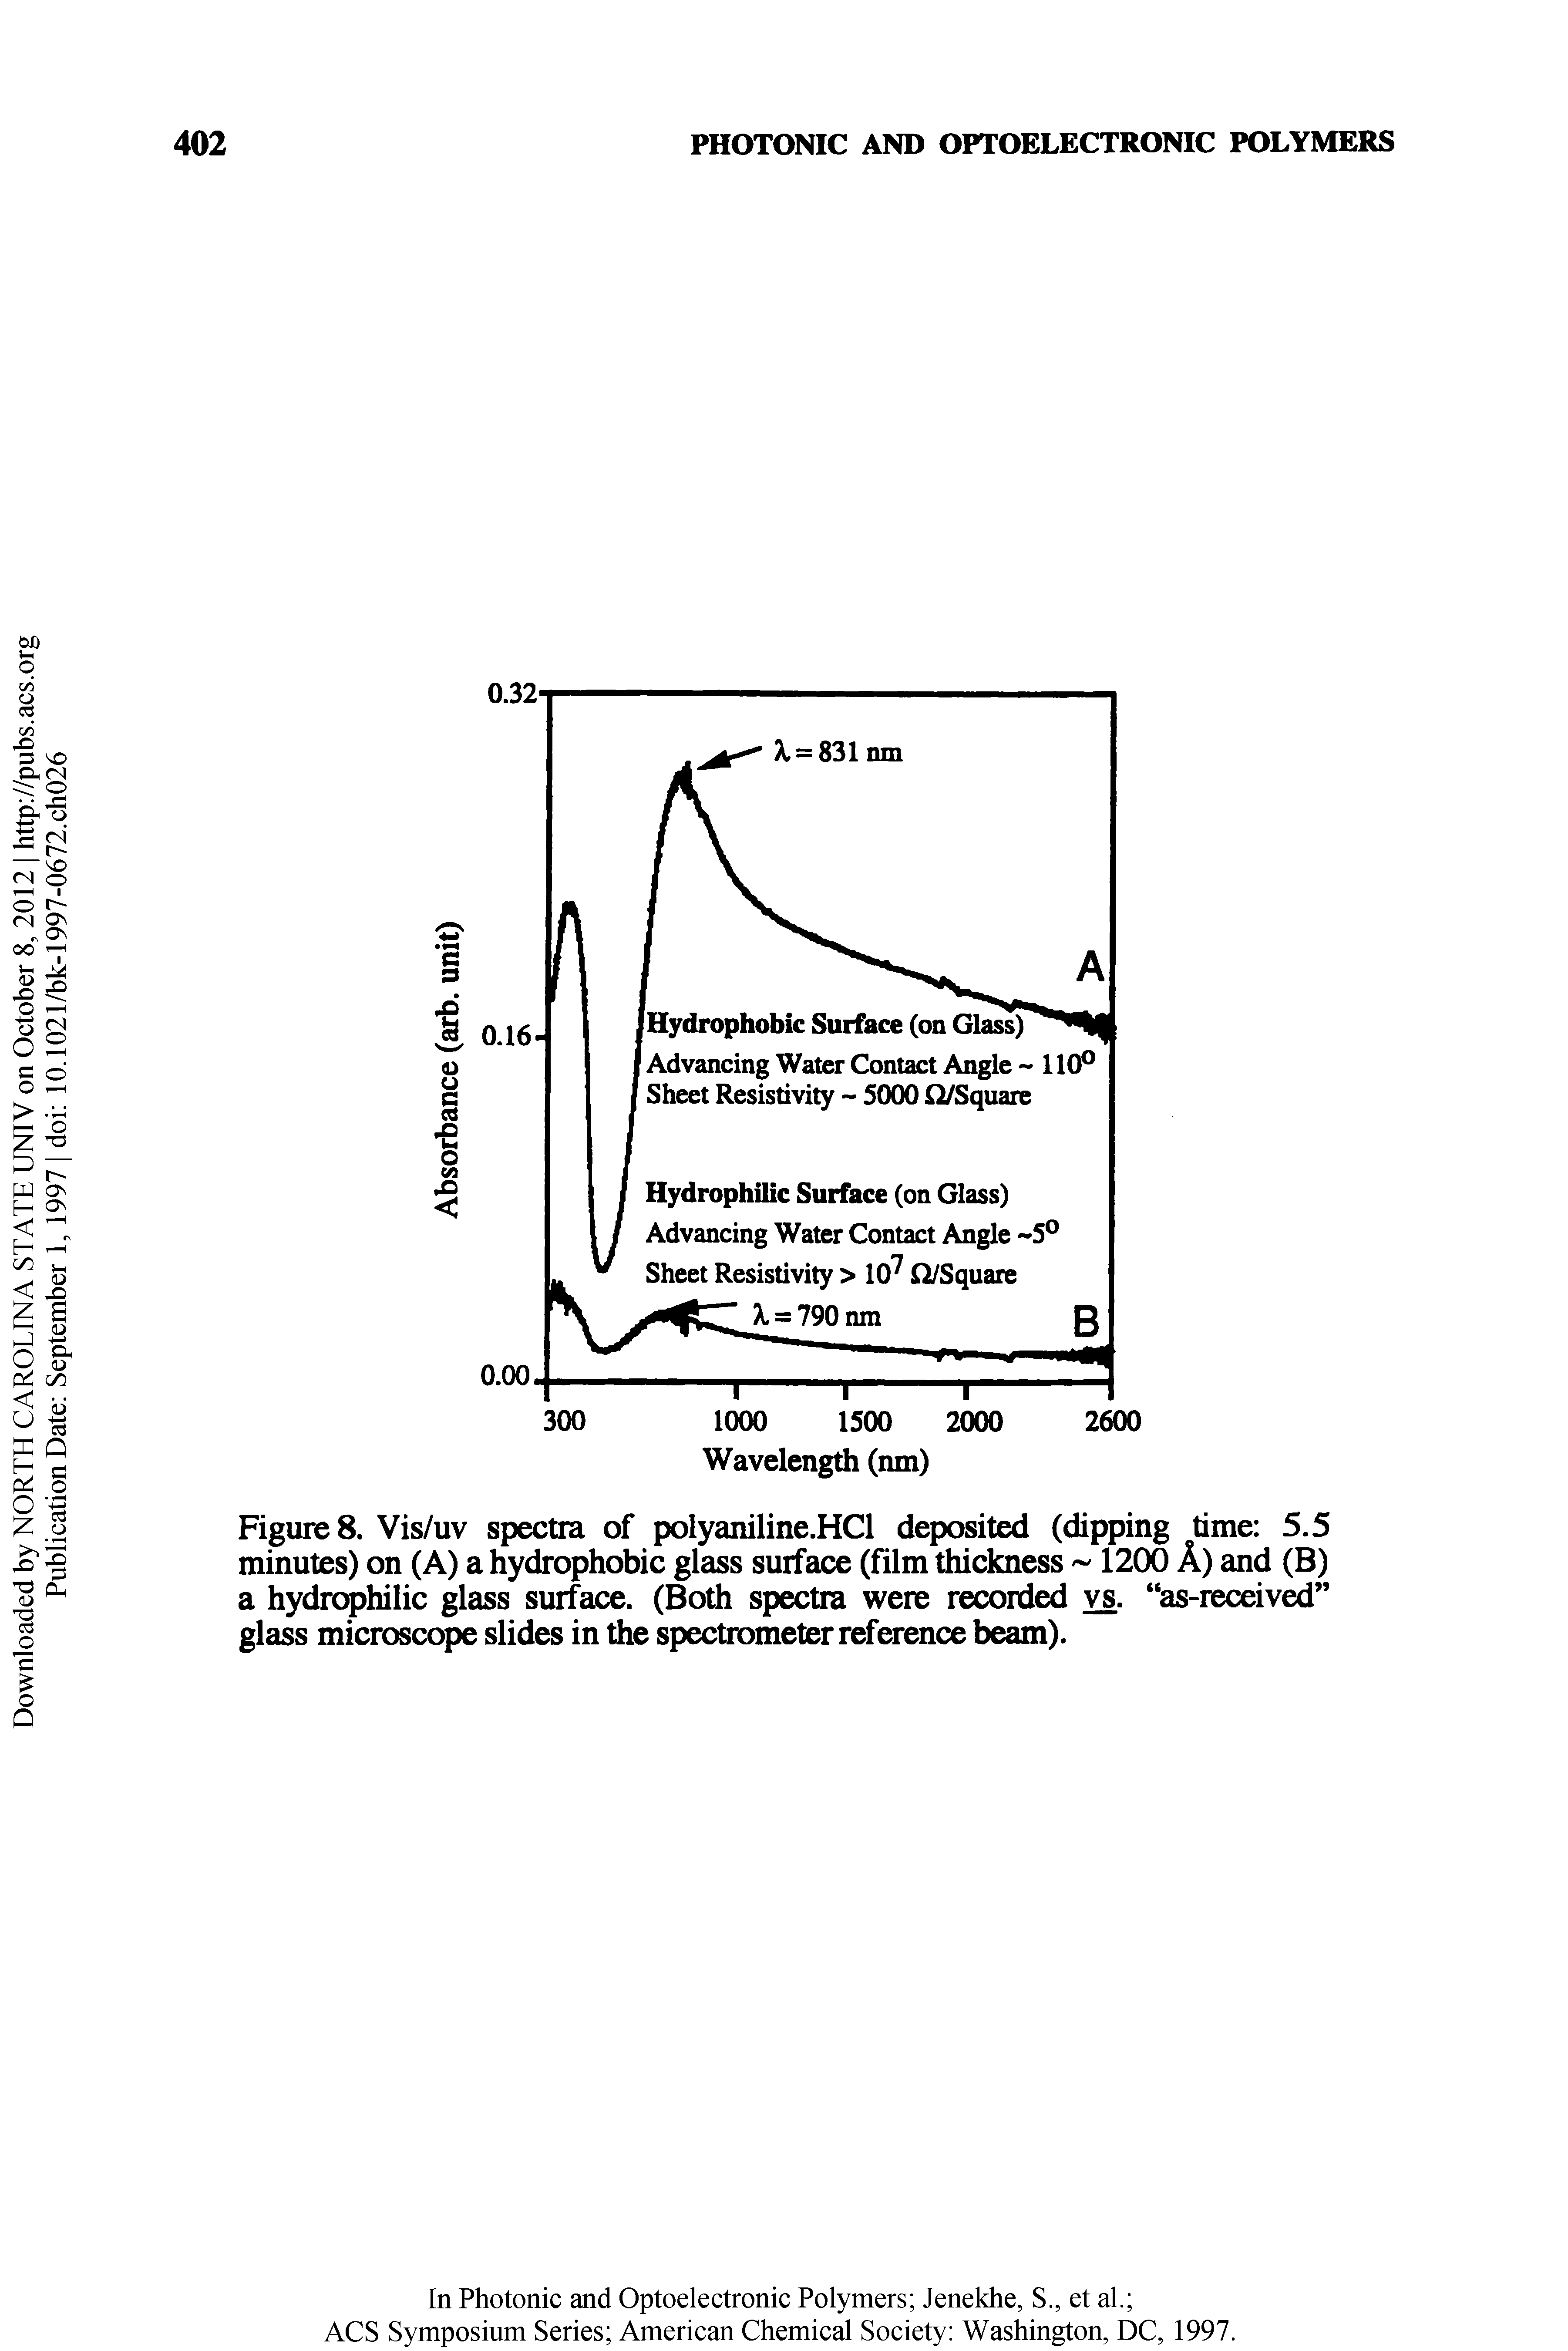 Figures. Vis/uv spectra of polyaniline.HCl deposited (dipping time 5.5 minutes) on (A) a hydrophobic glass surface (film thickness 1200 A) and (B) a hydrophilic glass surface. (Both spectra were recorded vs. as-receiv glass microscope slides in the spectrometer reference beam).